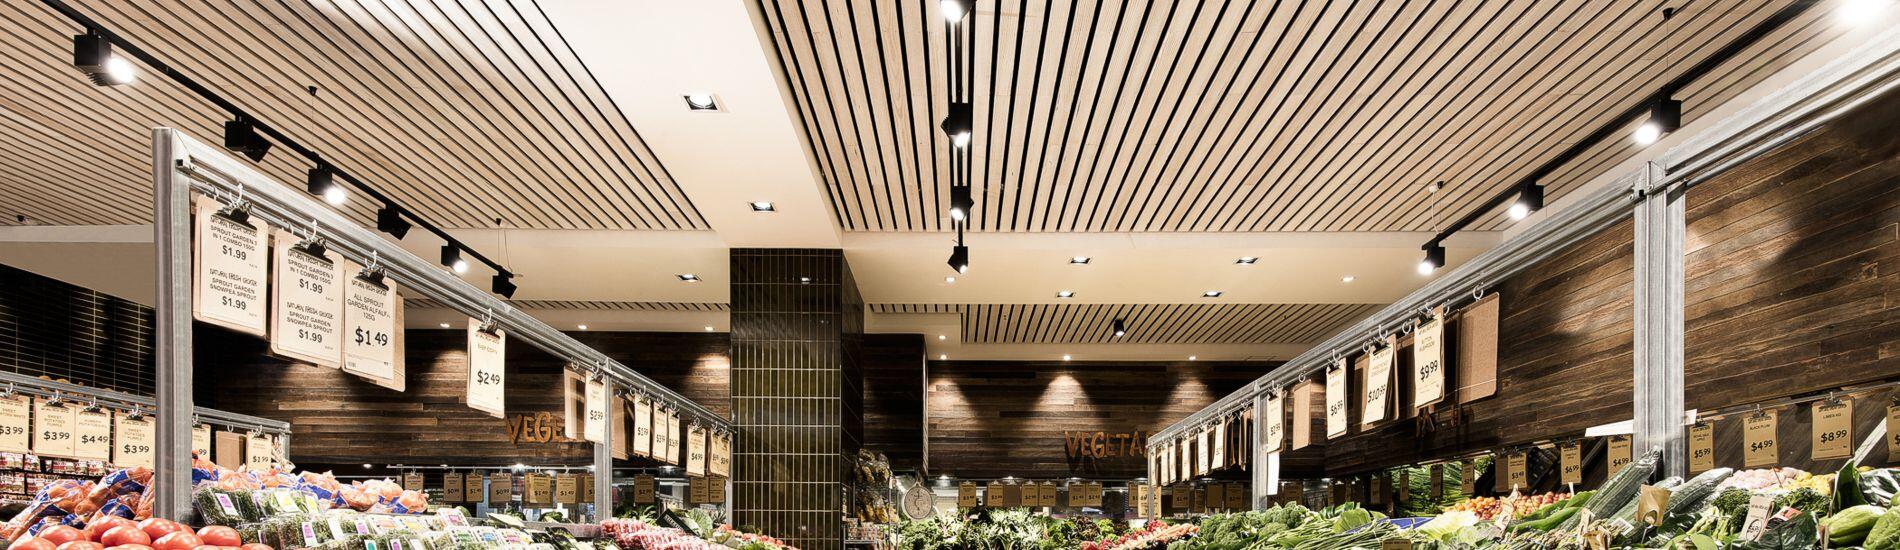 DRIFTWOOD Rustic Timber Ceiling Panel Create Atmosphere For Fresh Grocer Shop Interior